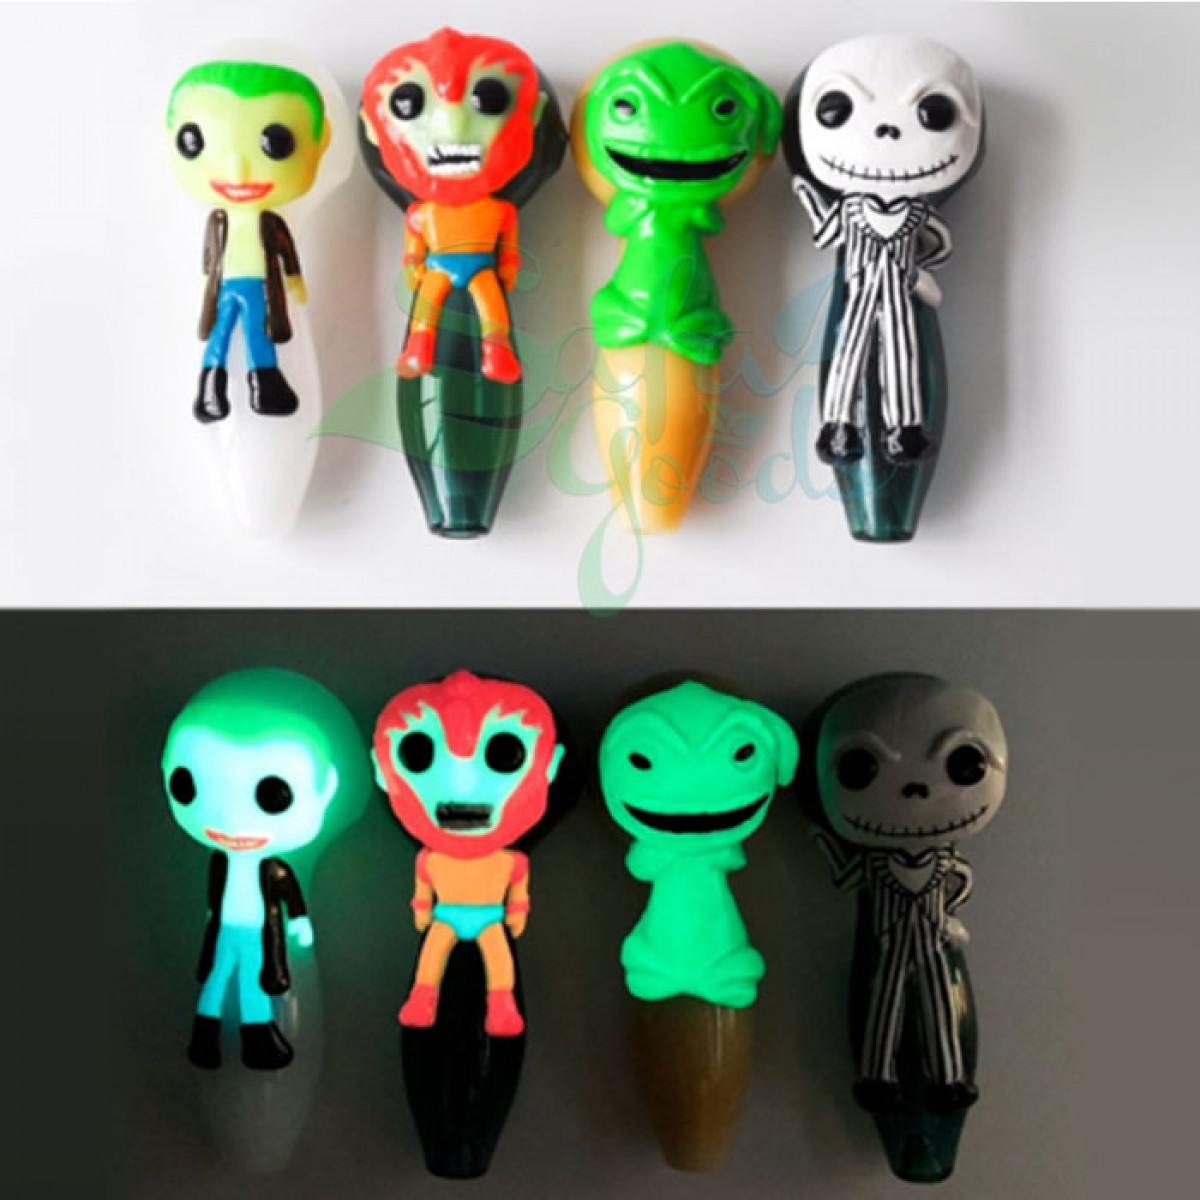 5 Inch Character Glow in the Dark Glass Hand Pipes